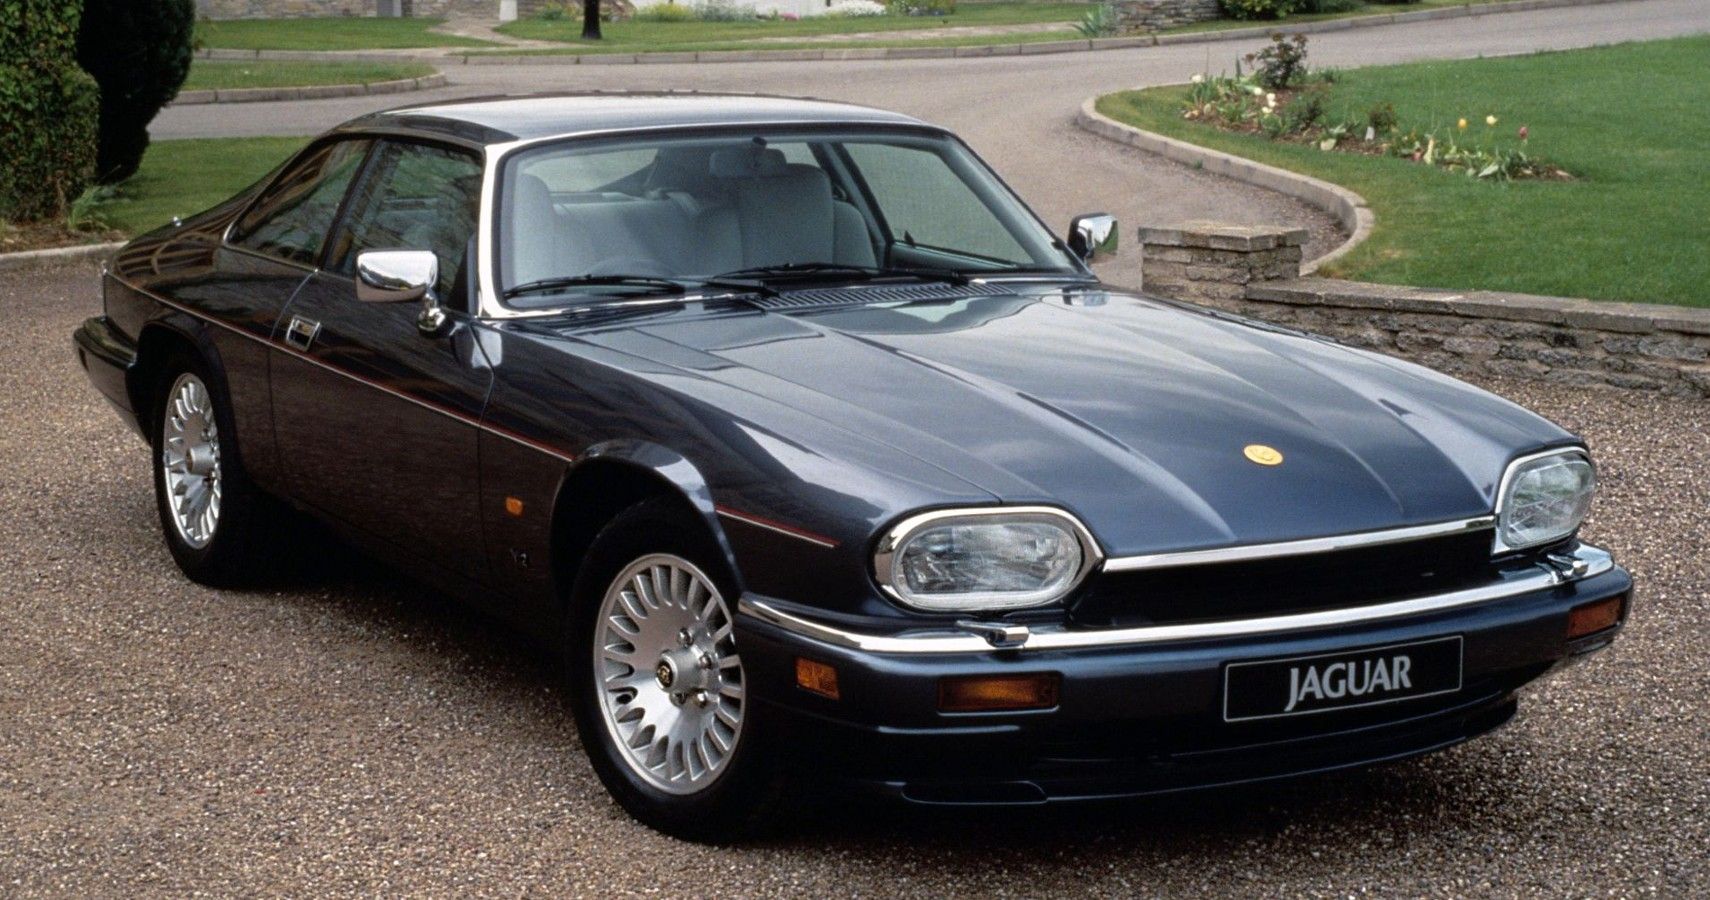 Here’s How The Jaguar XJS Will Bankrupt You Through Maintenance And Repair Costs